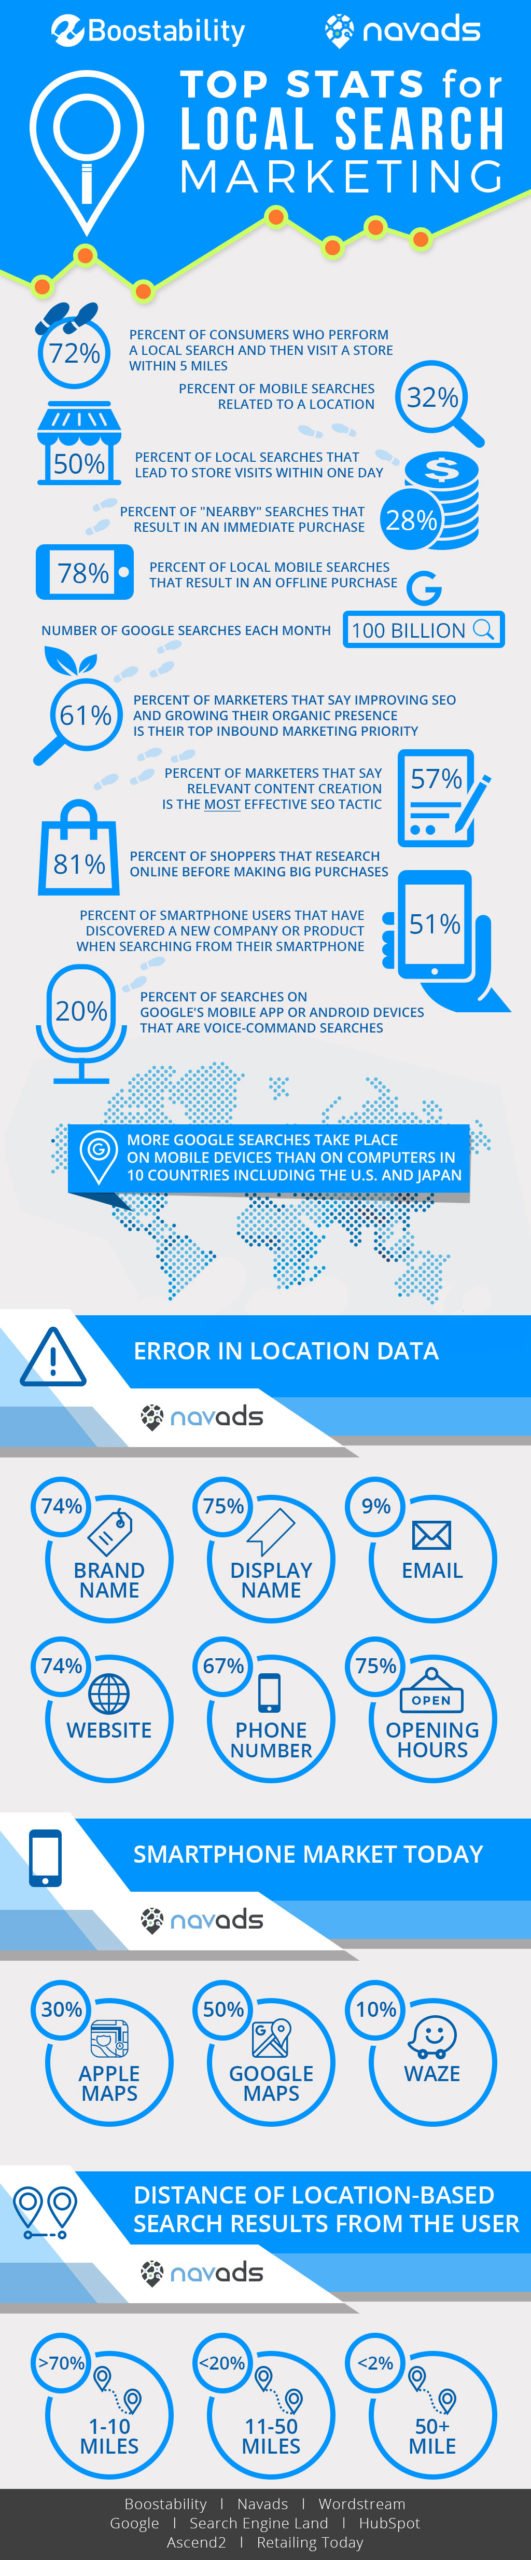 local search marketing infographic